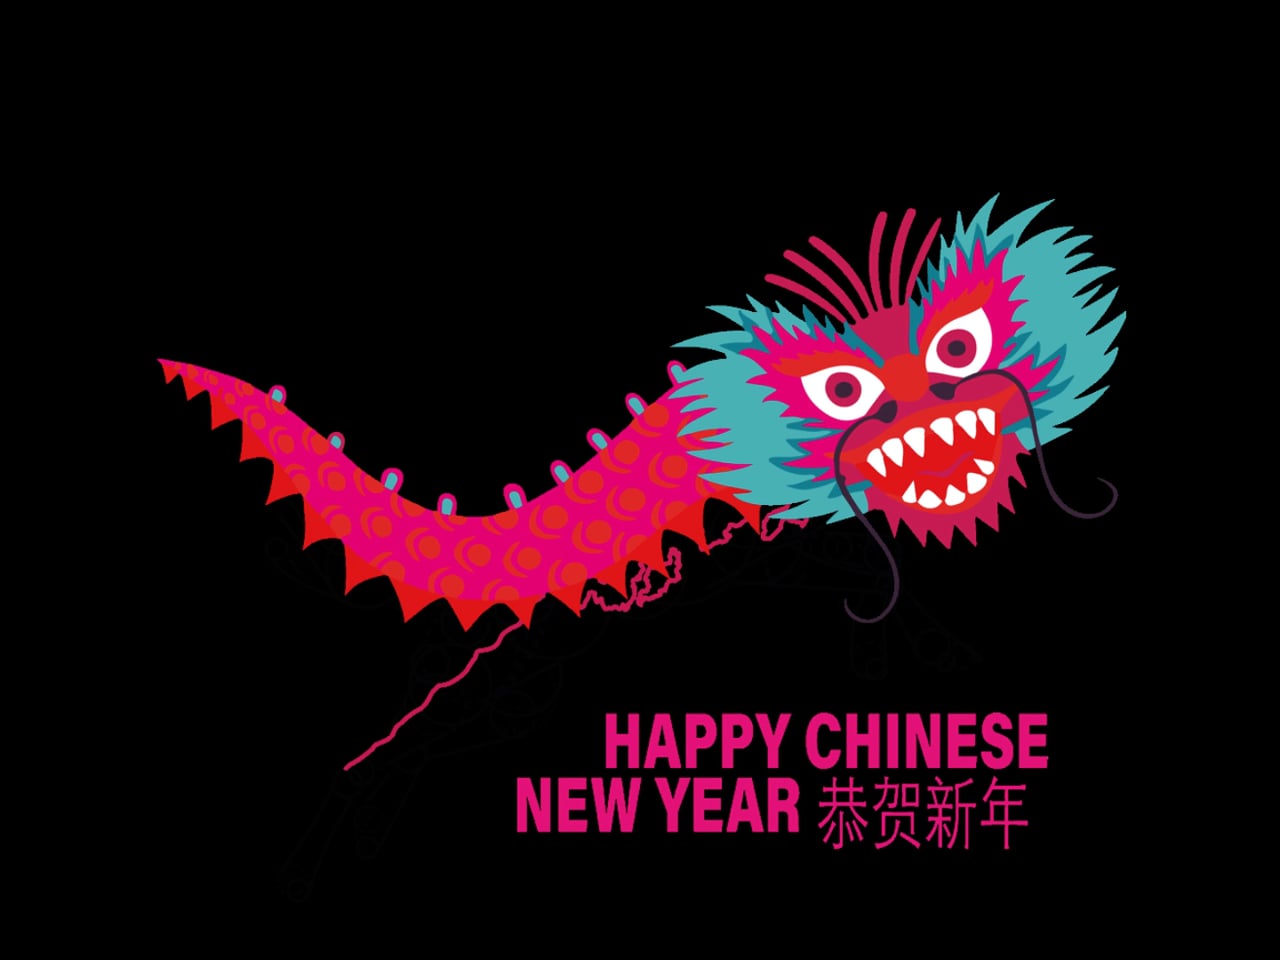 Happy Chinese New Year - Special